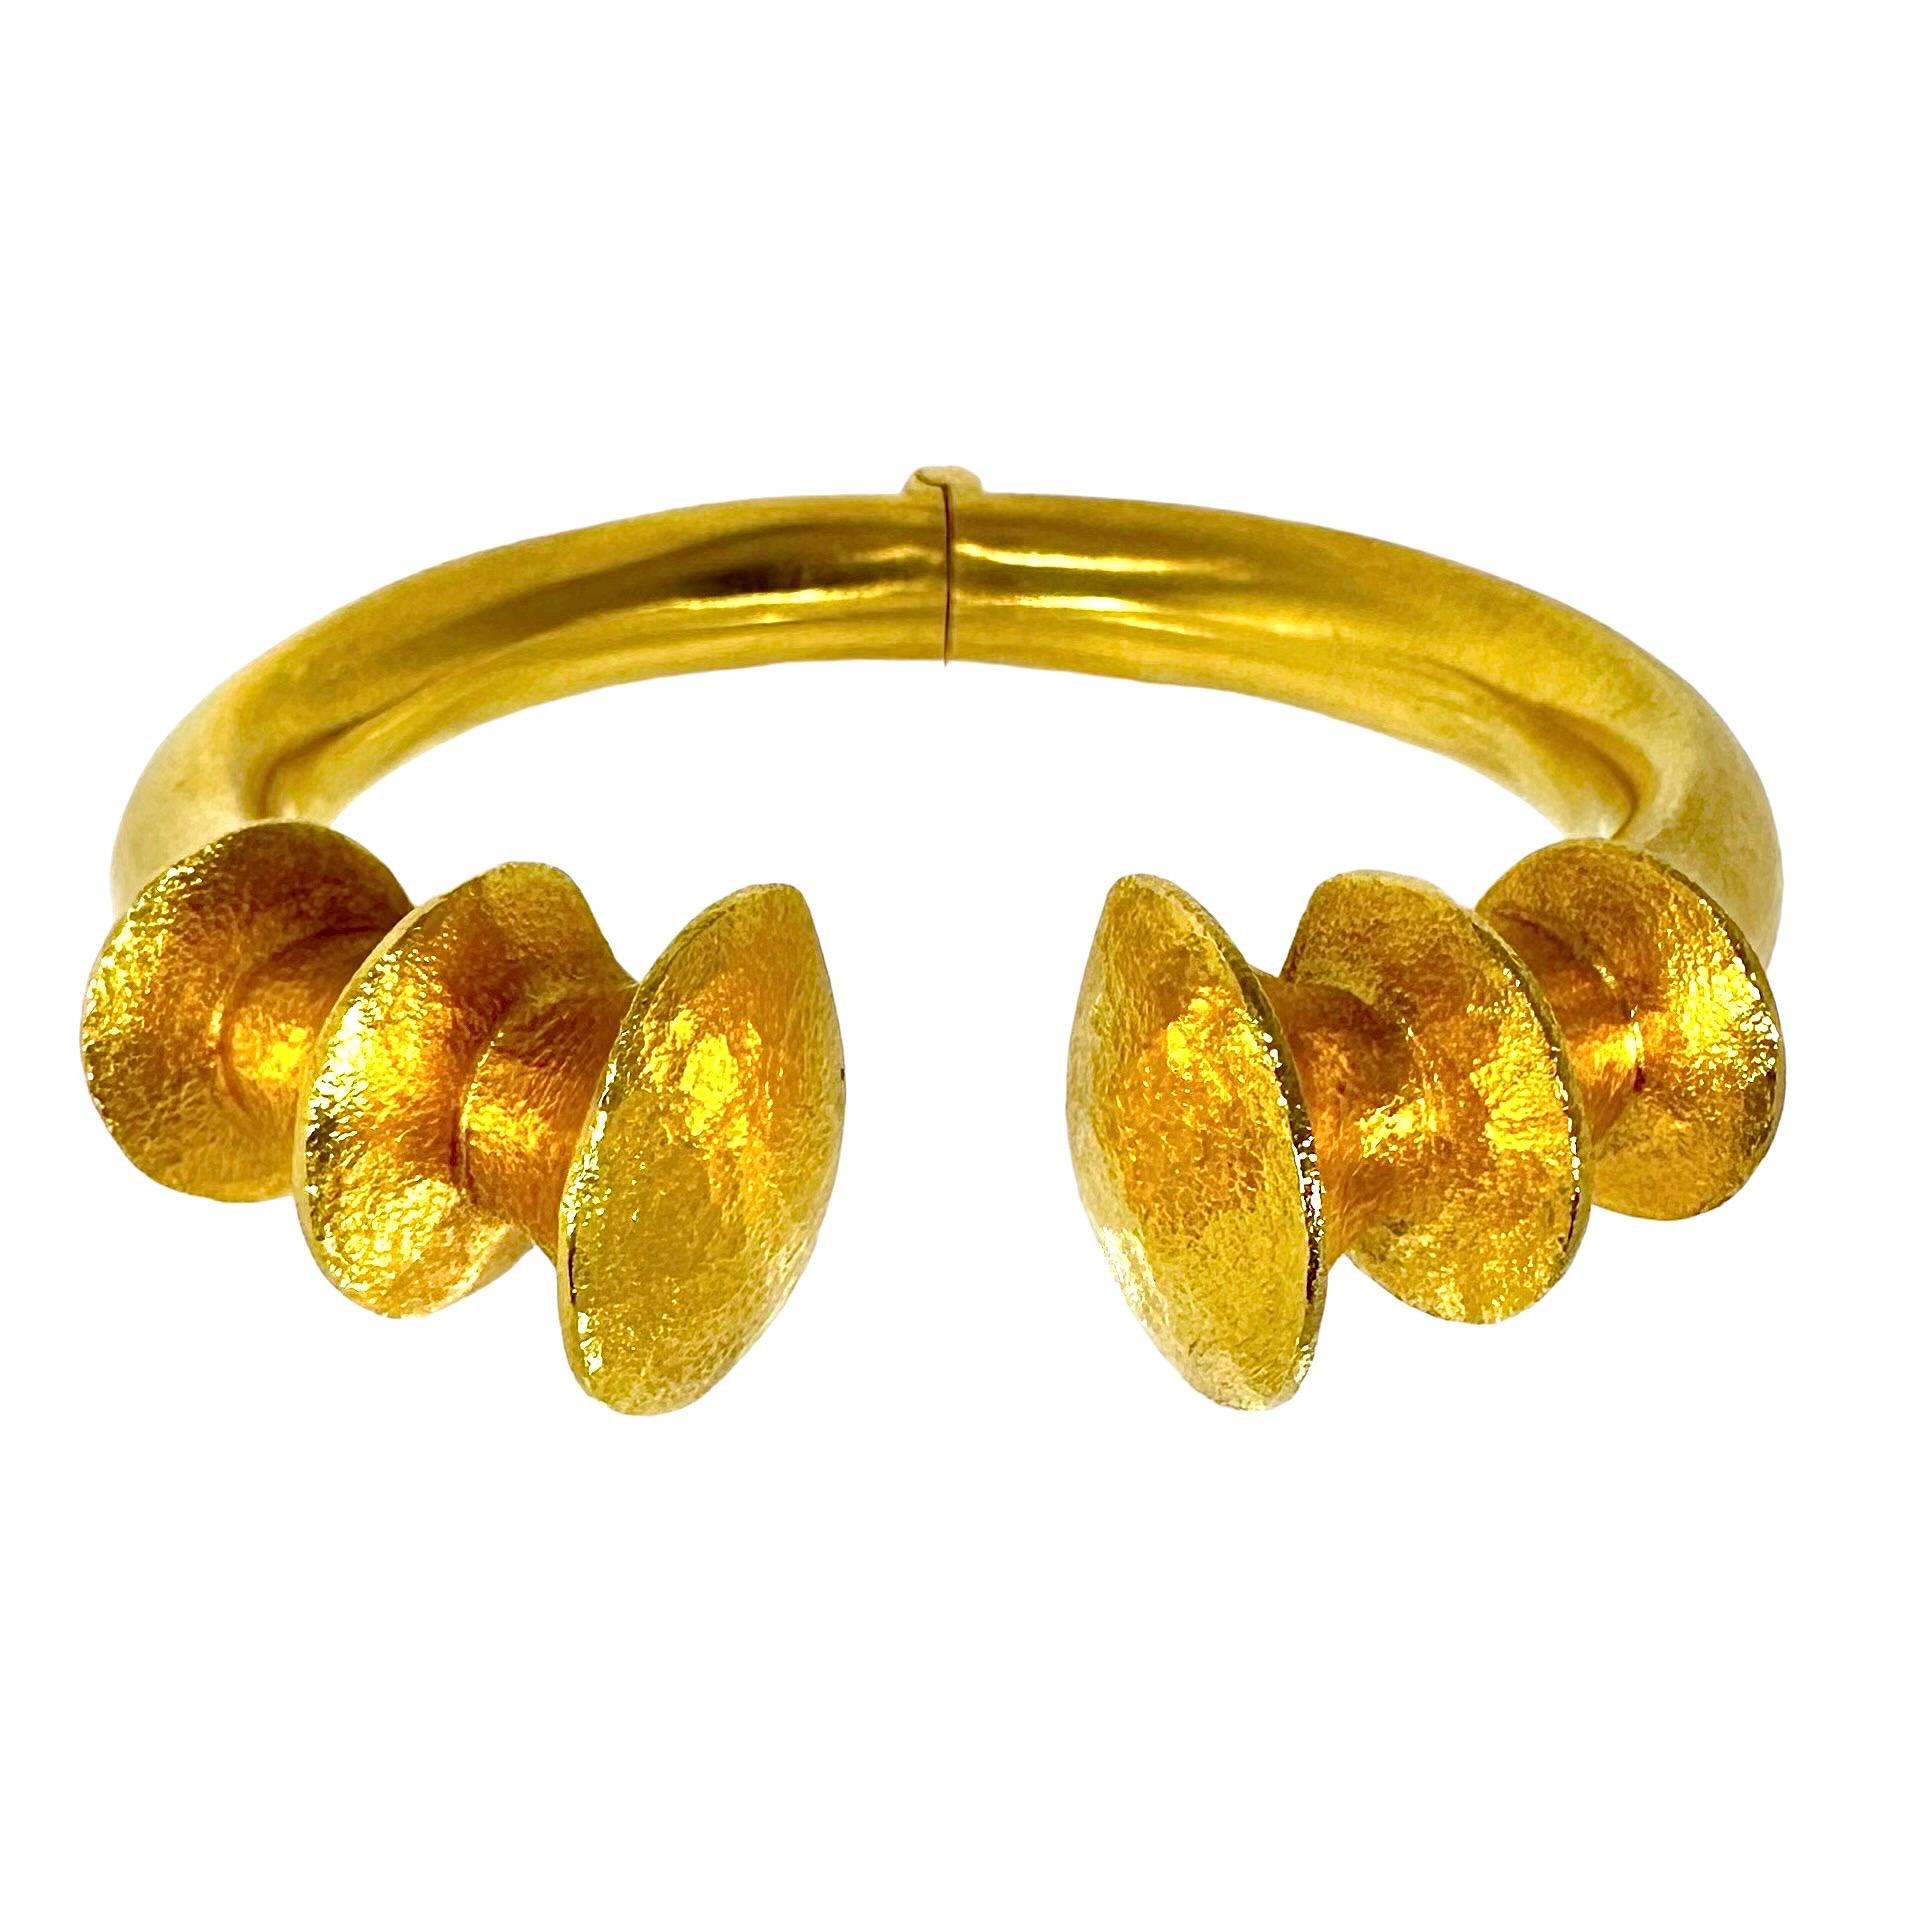 This very dramatic Ilias Lalaounis hinged 22k yellow gold bangle bracelet is a true departure from the venerated Greek jewelers usual style. A wonderful satin finish body terminates at the front in six delicately hammered finish soaring arches. The